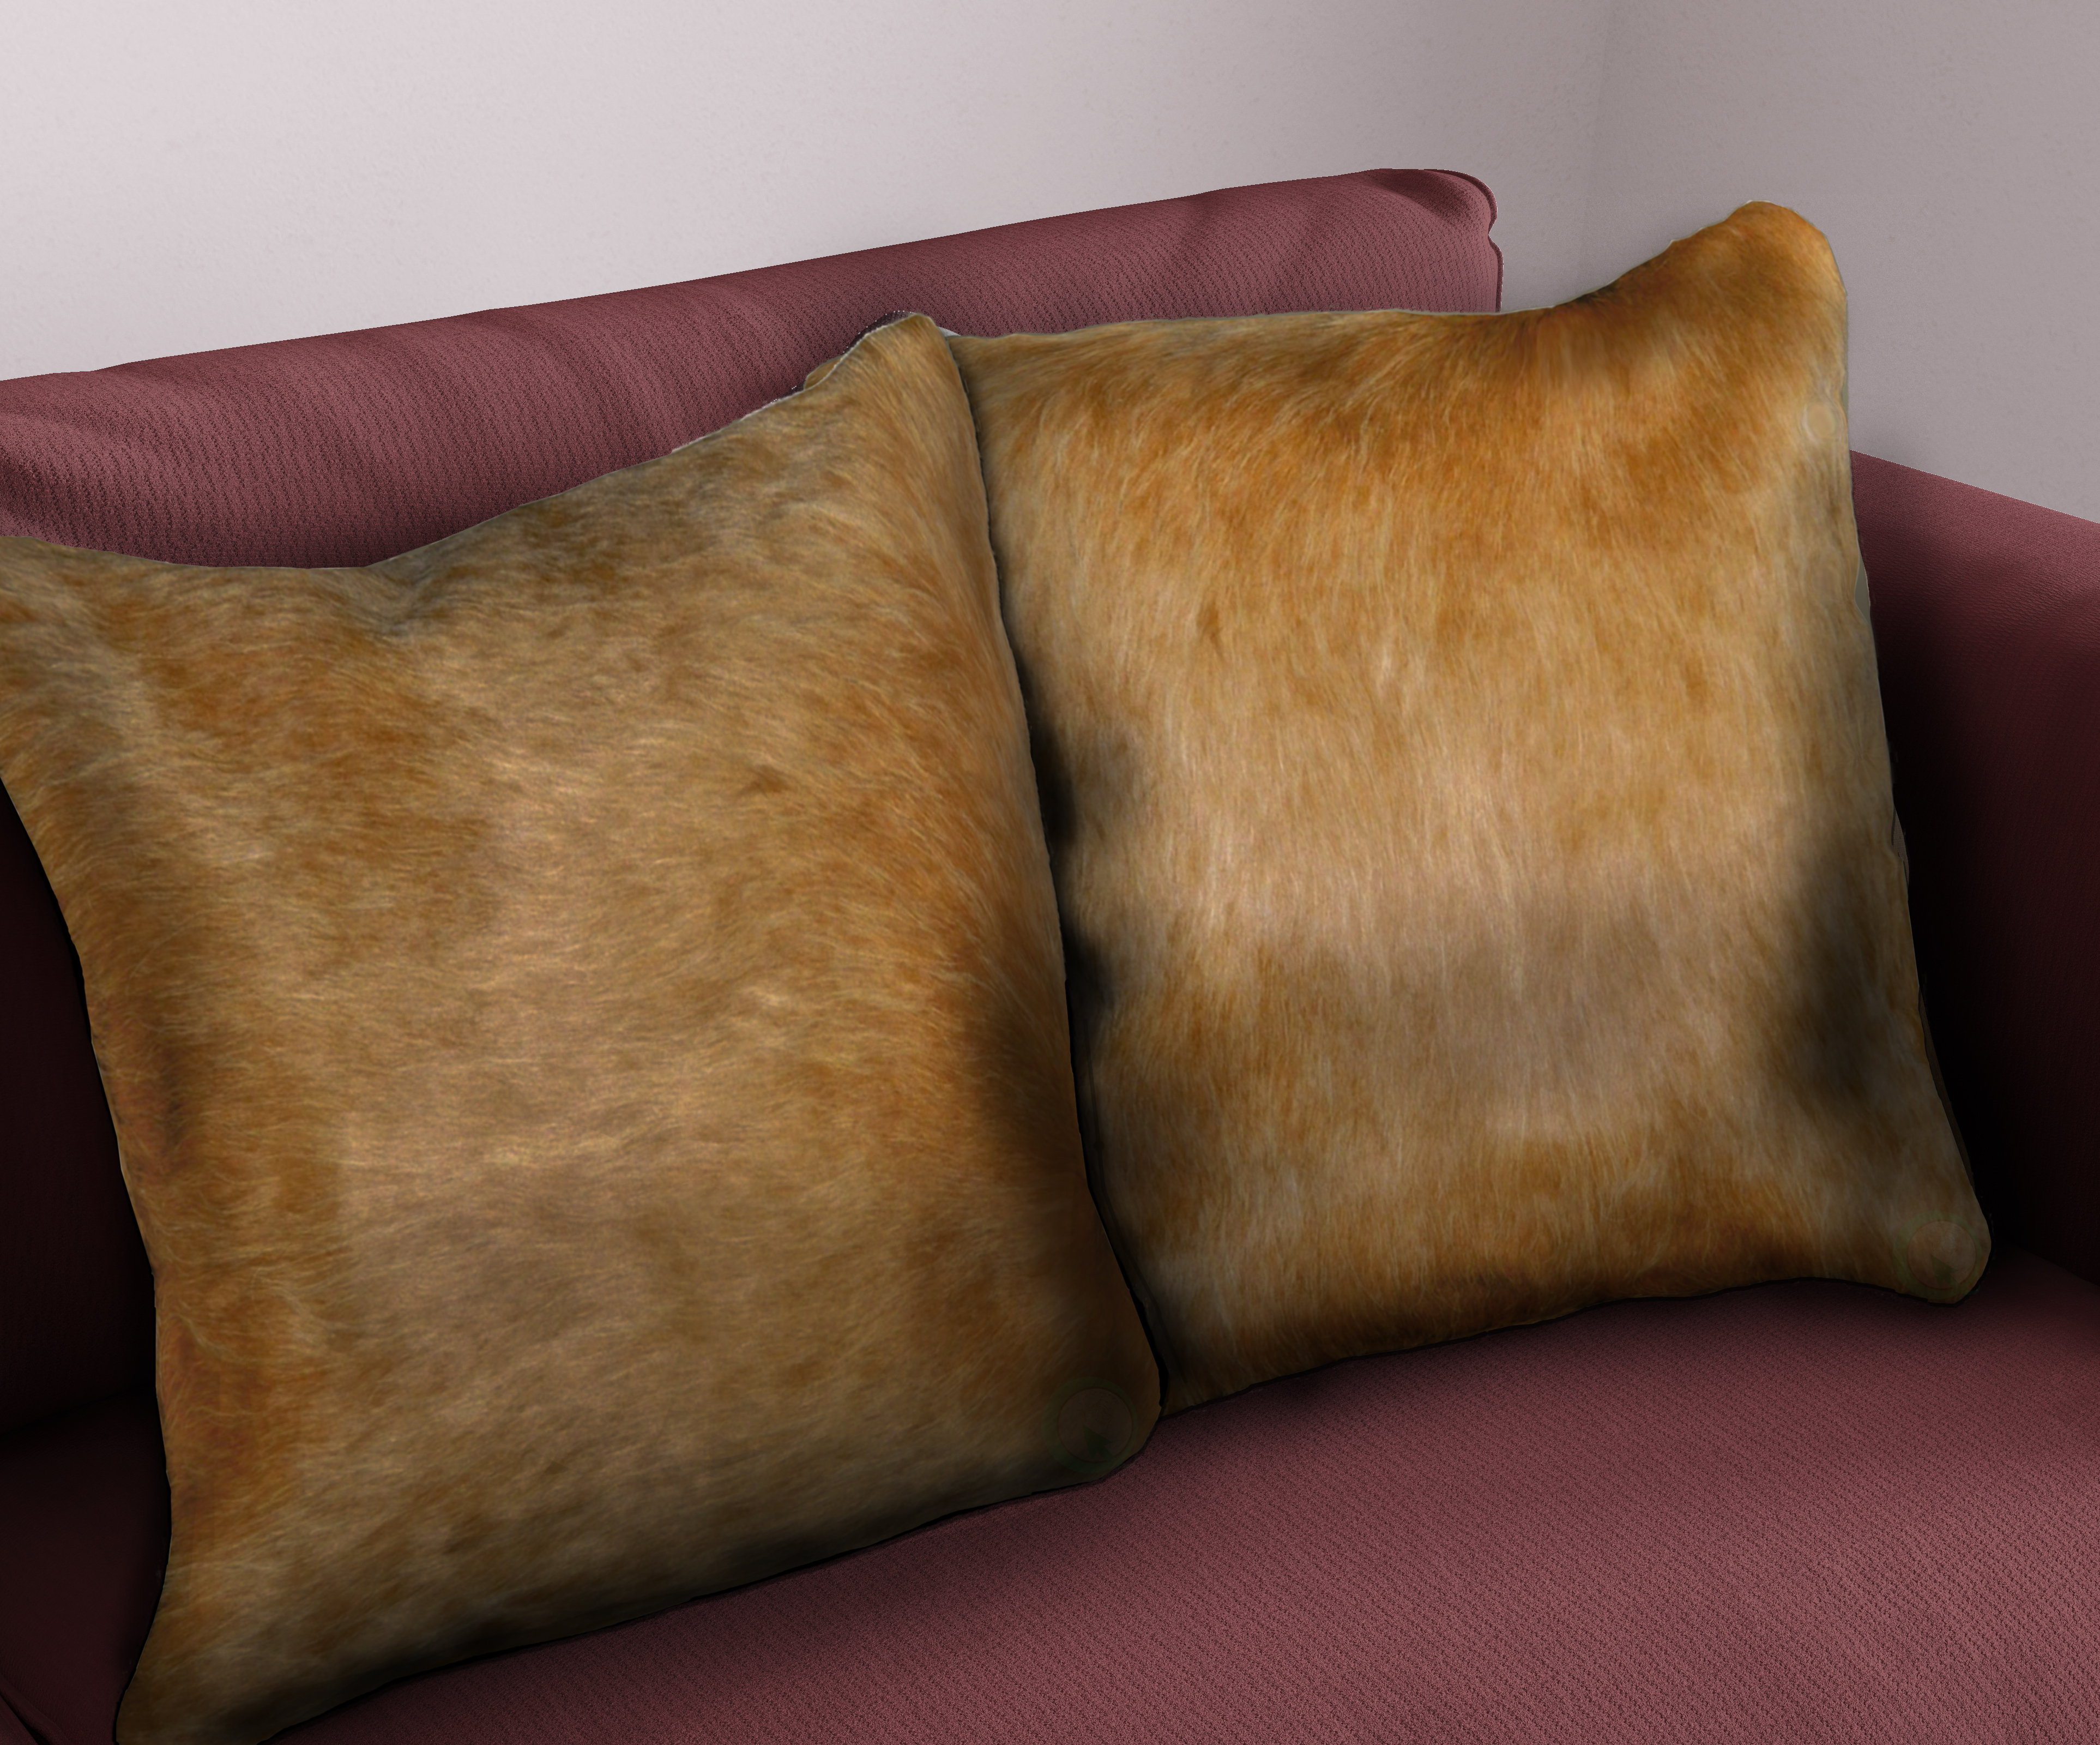 16 in. Brazilian Genuine Natural Leather High Quality Double Sided Cowhide Throw Pillow, Beige